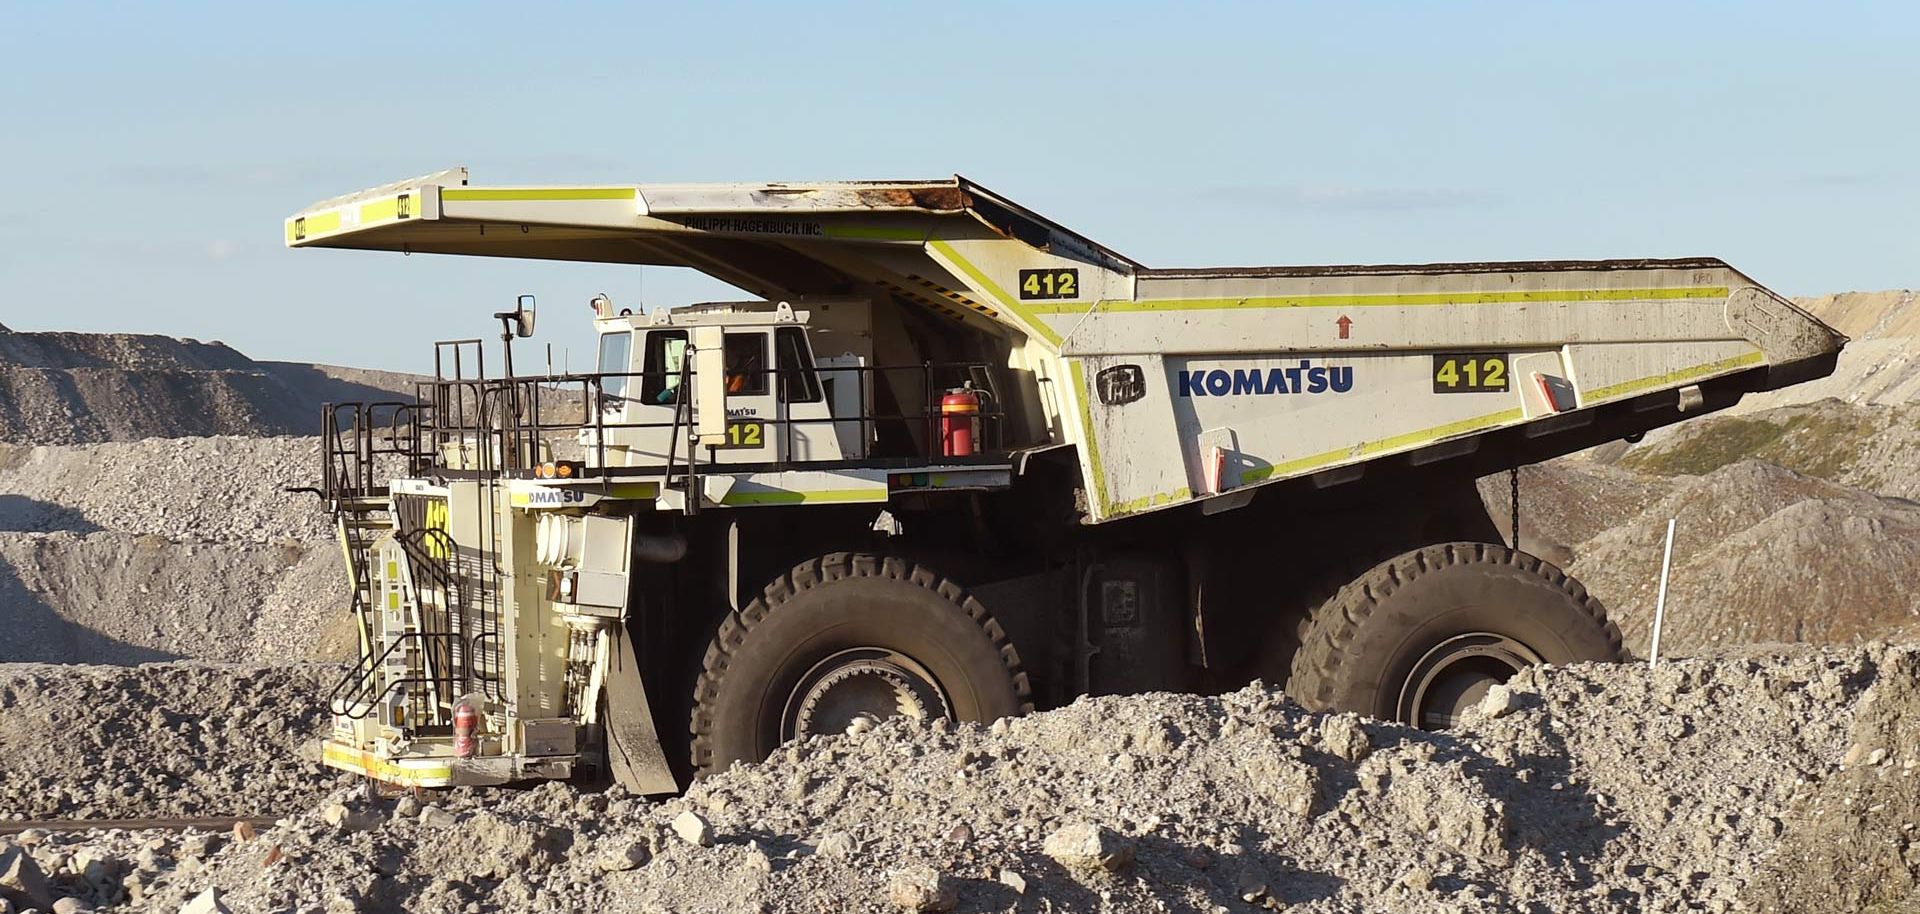 Driverless trucks in the mining industry